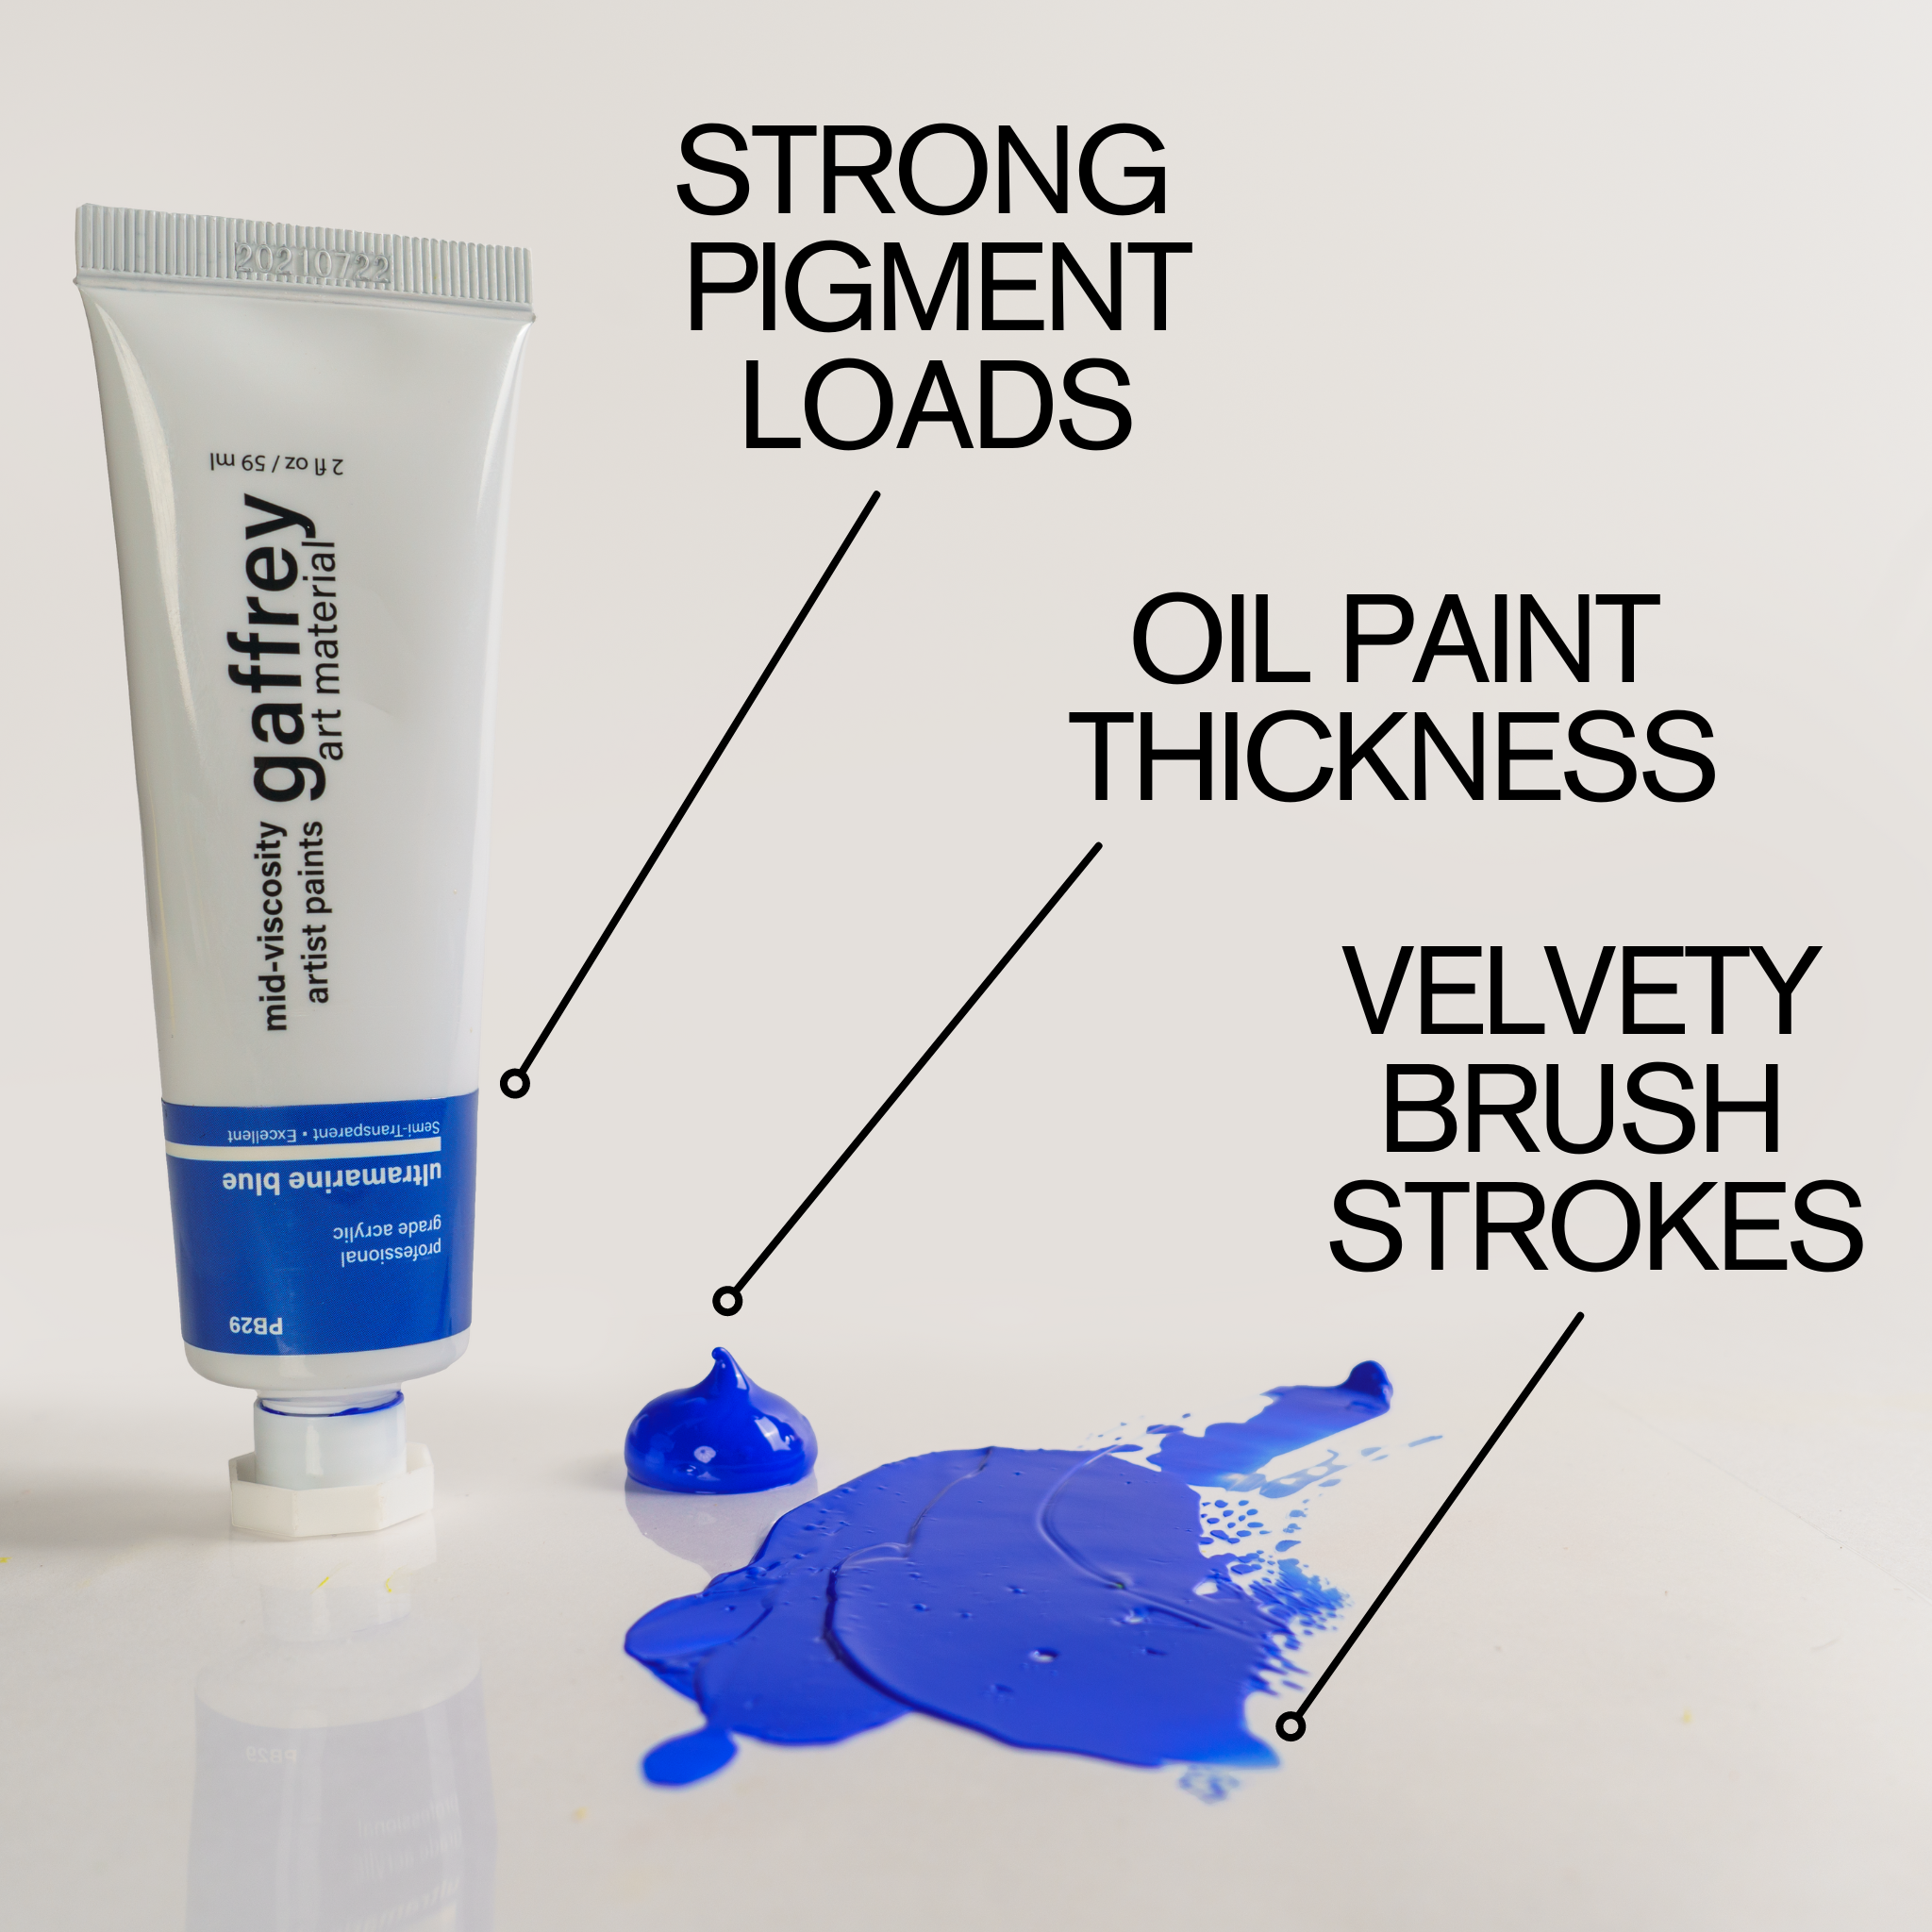 An acrylic paint tube labeled with strong pigment load next to a sample of blue paint showing oil-like thickness and velvety brush strokes.